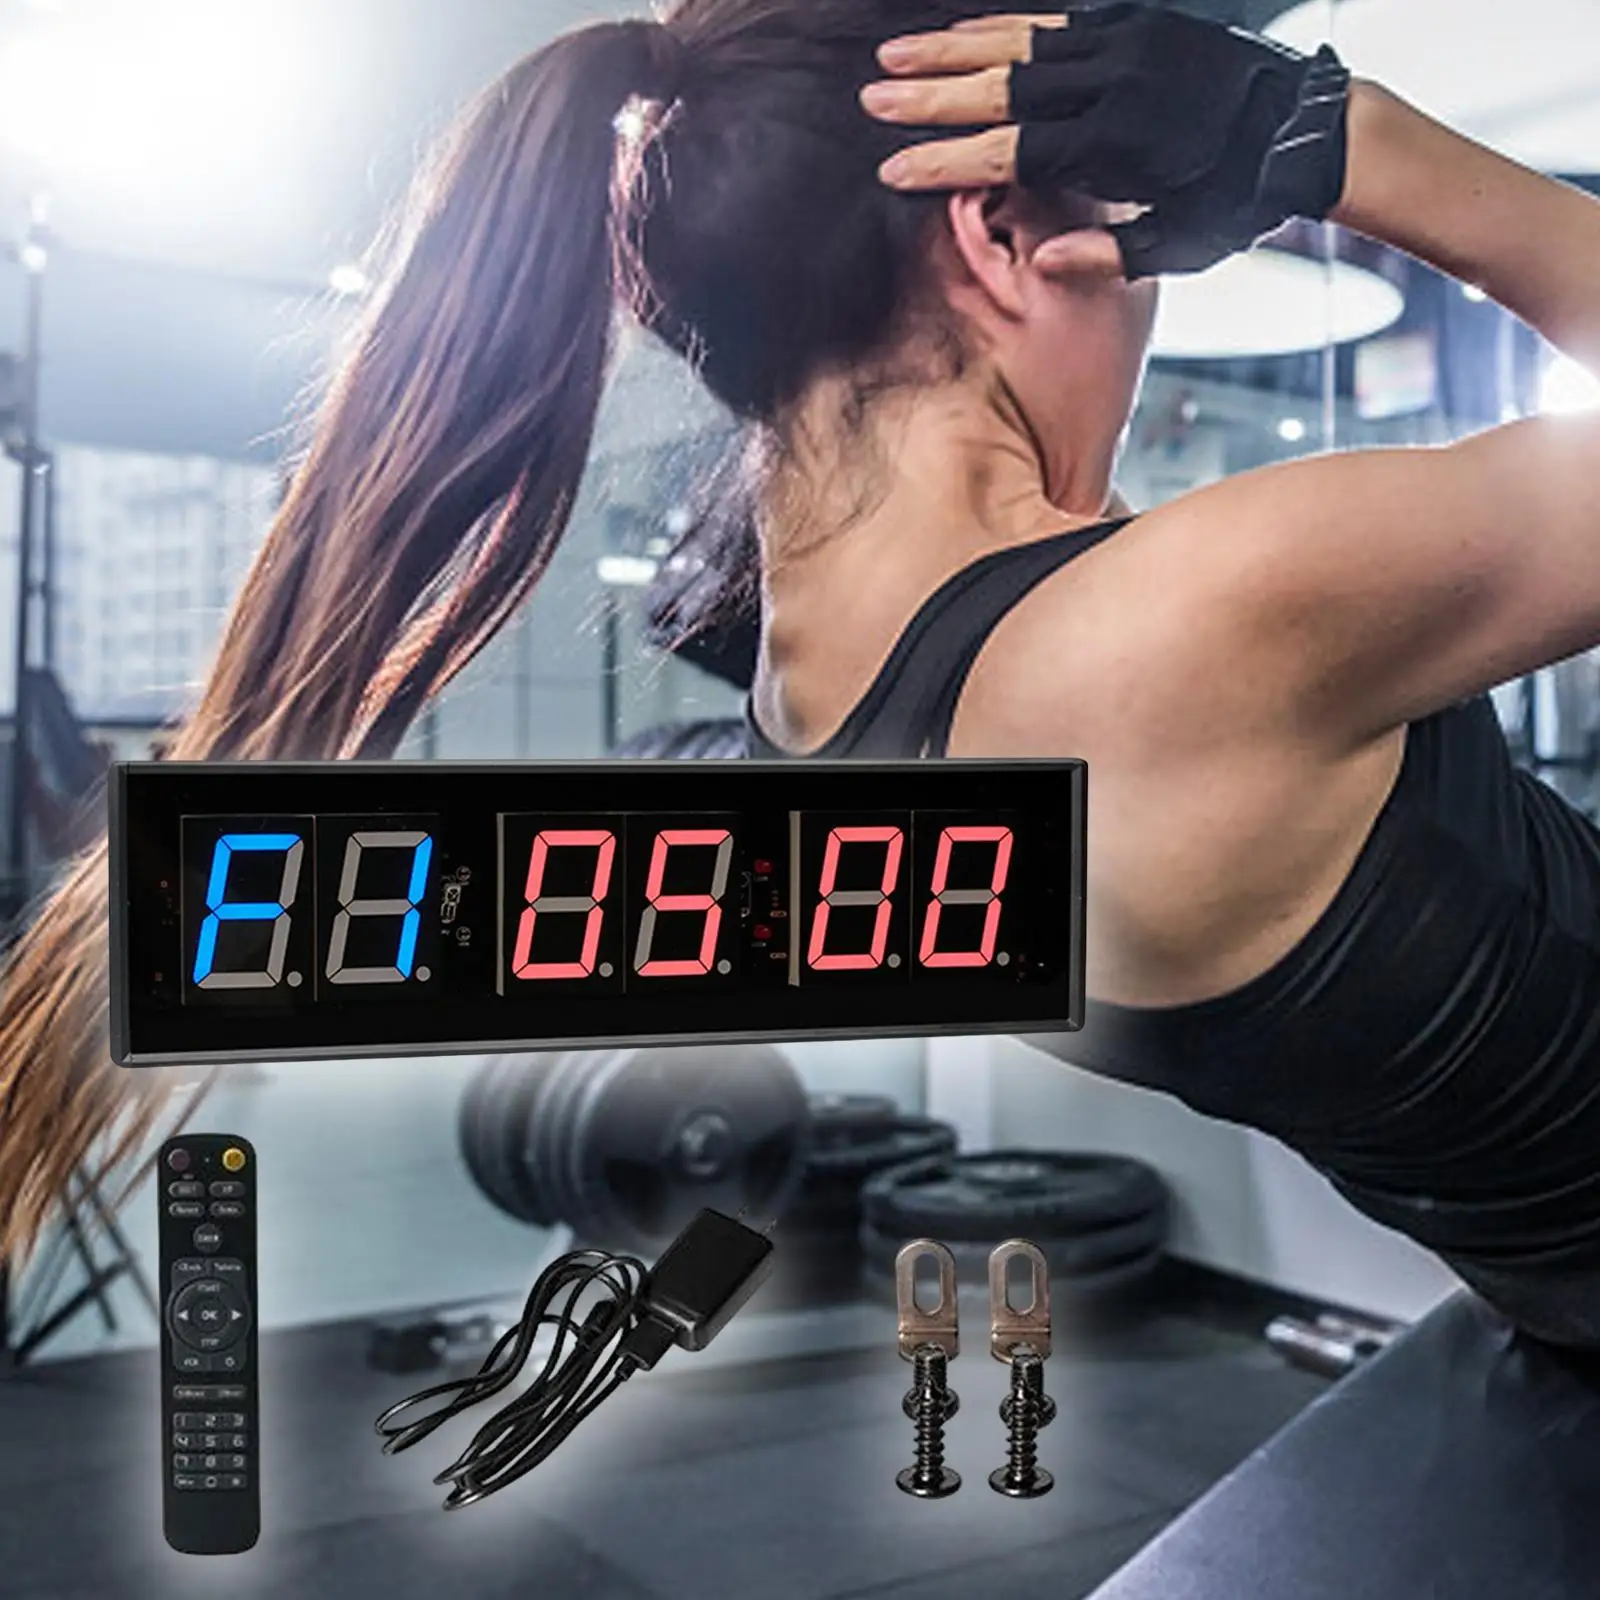 Interval Timer Portable Digital Display Count Down up Timer Workout Timer Stopwatch Timer for Garage Sports Fitness